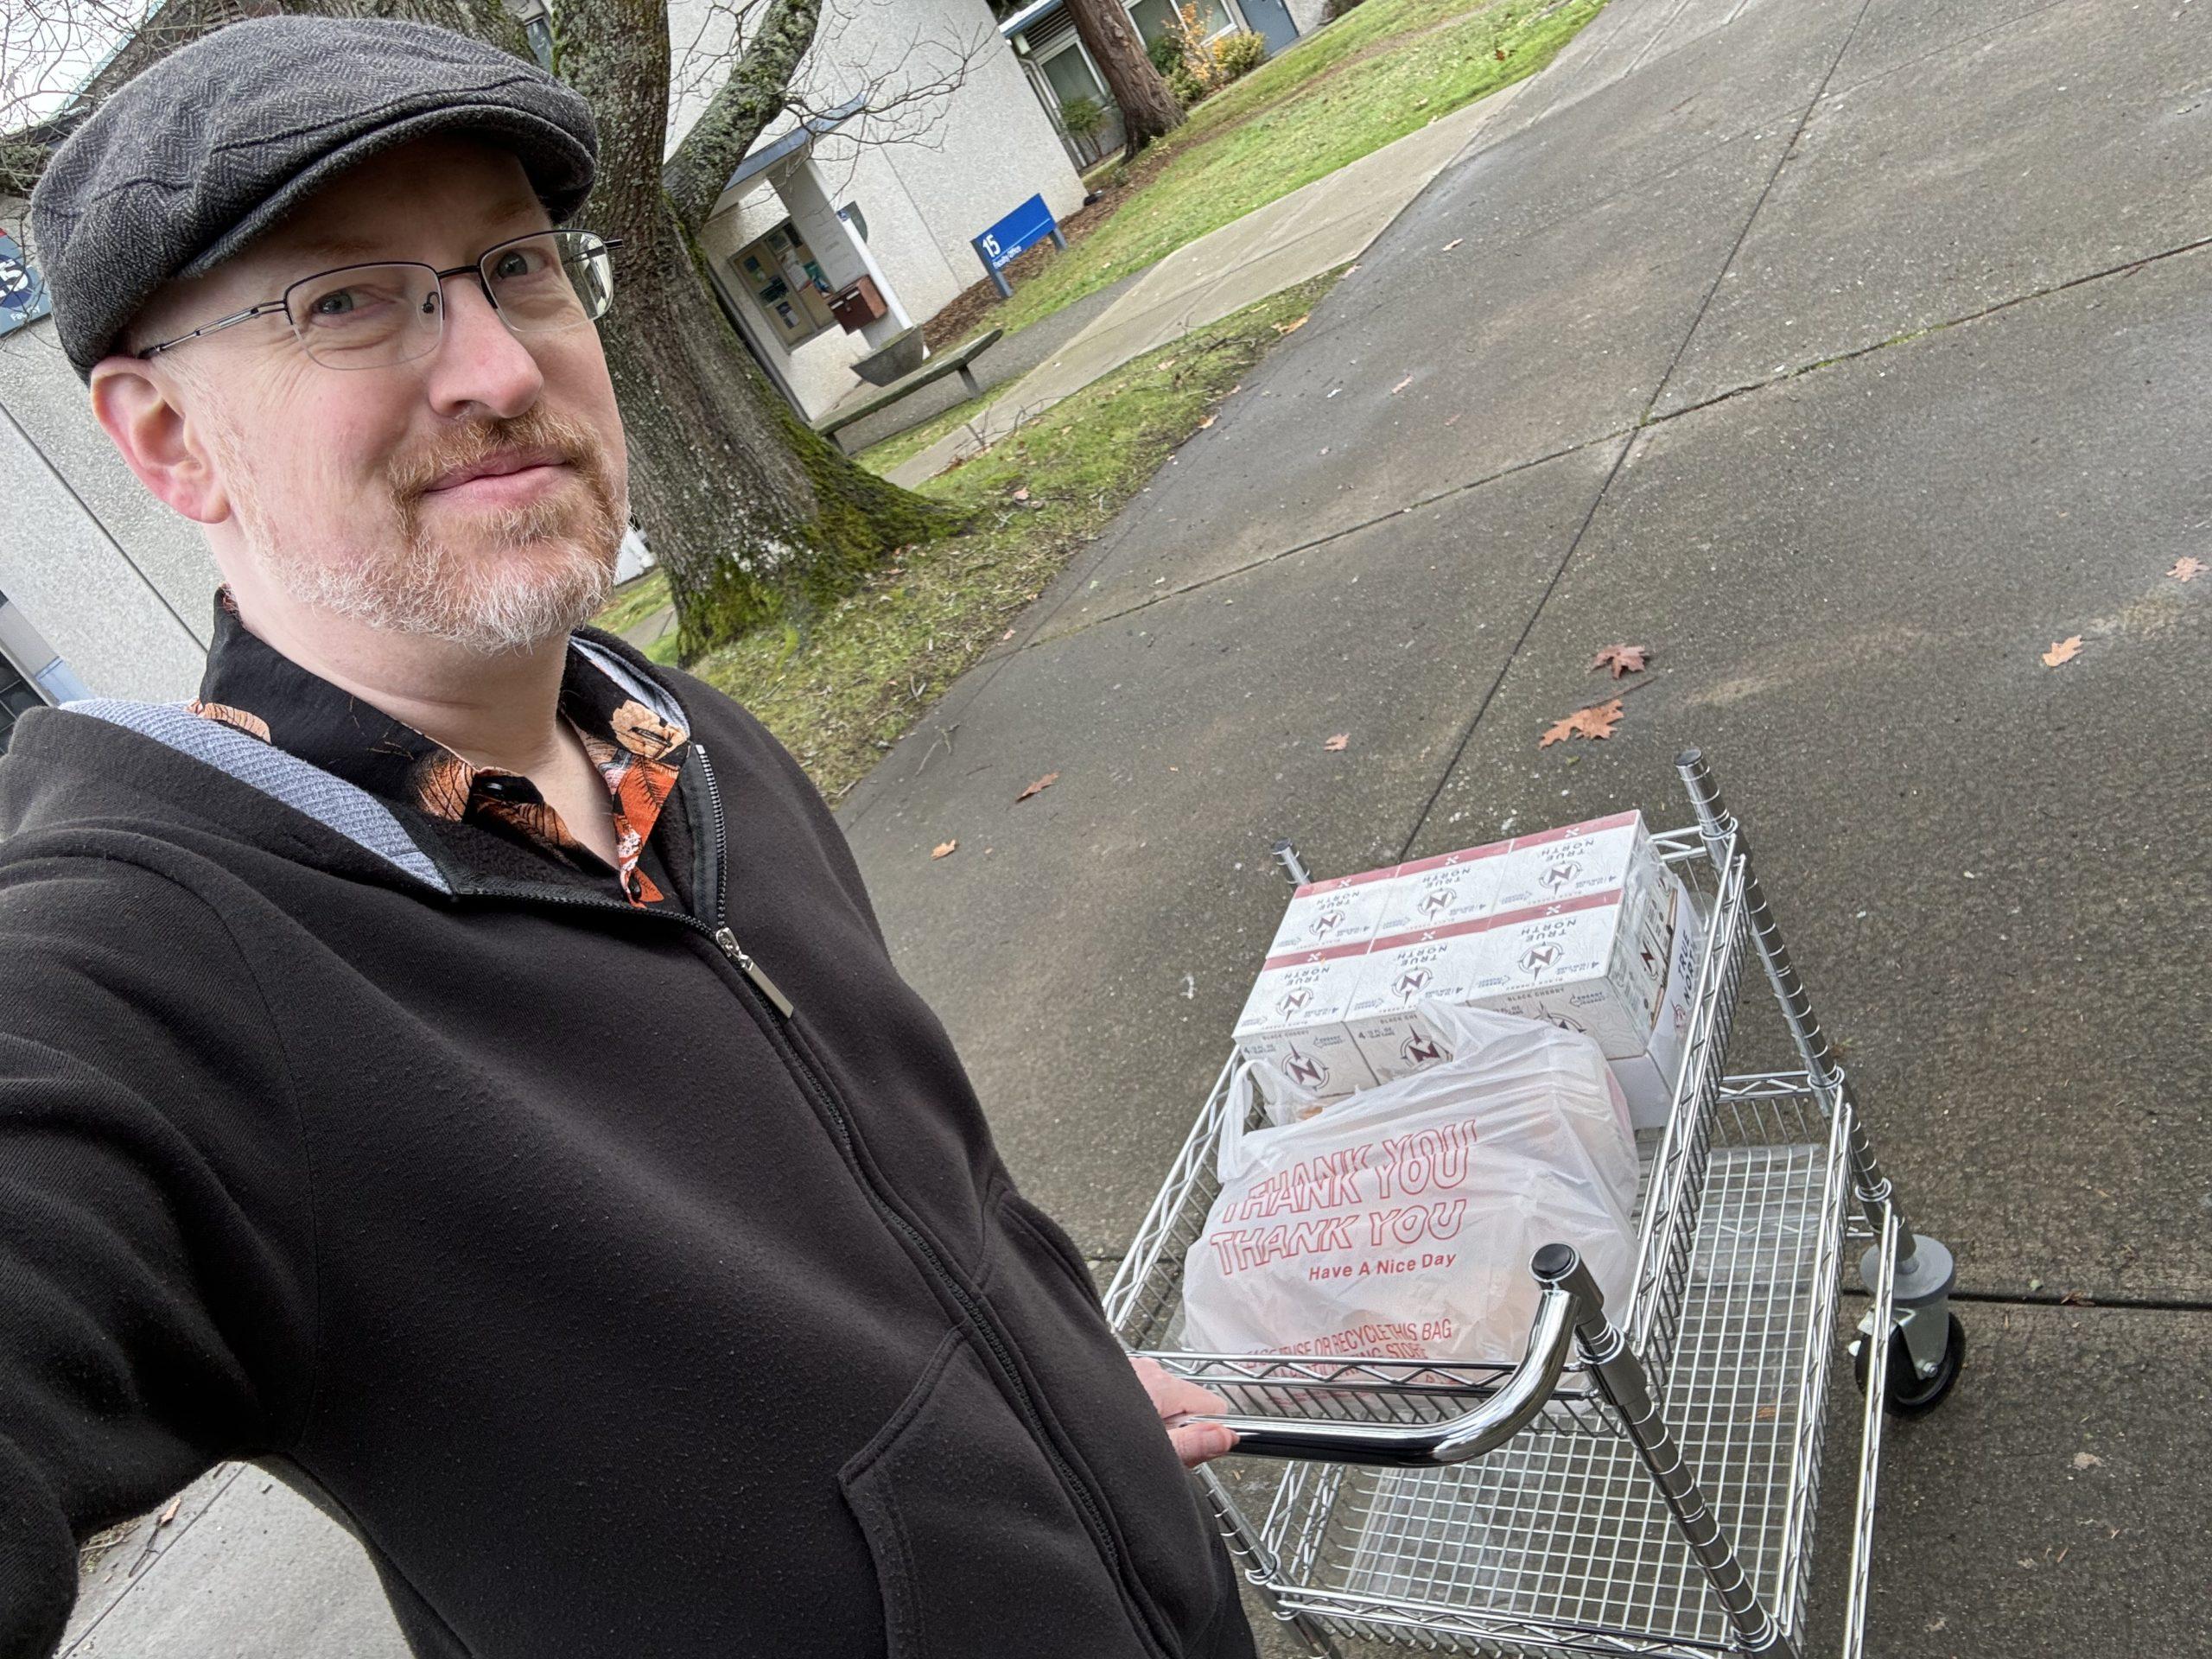 Me outside on a sidewalk, pushing a metal cart with a grocery bag of food and a small case of sodas.